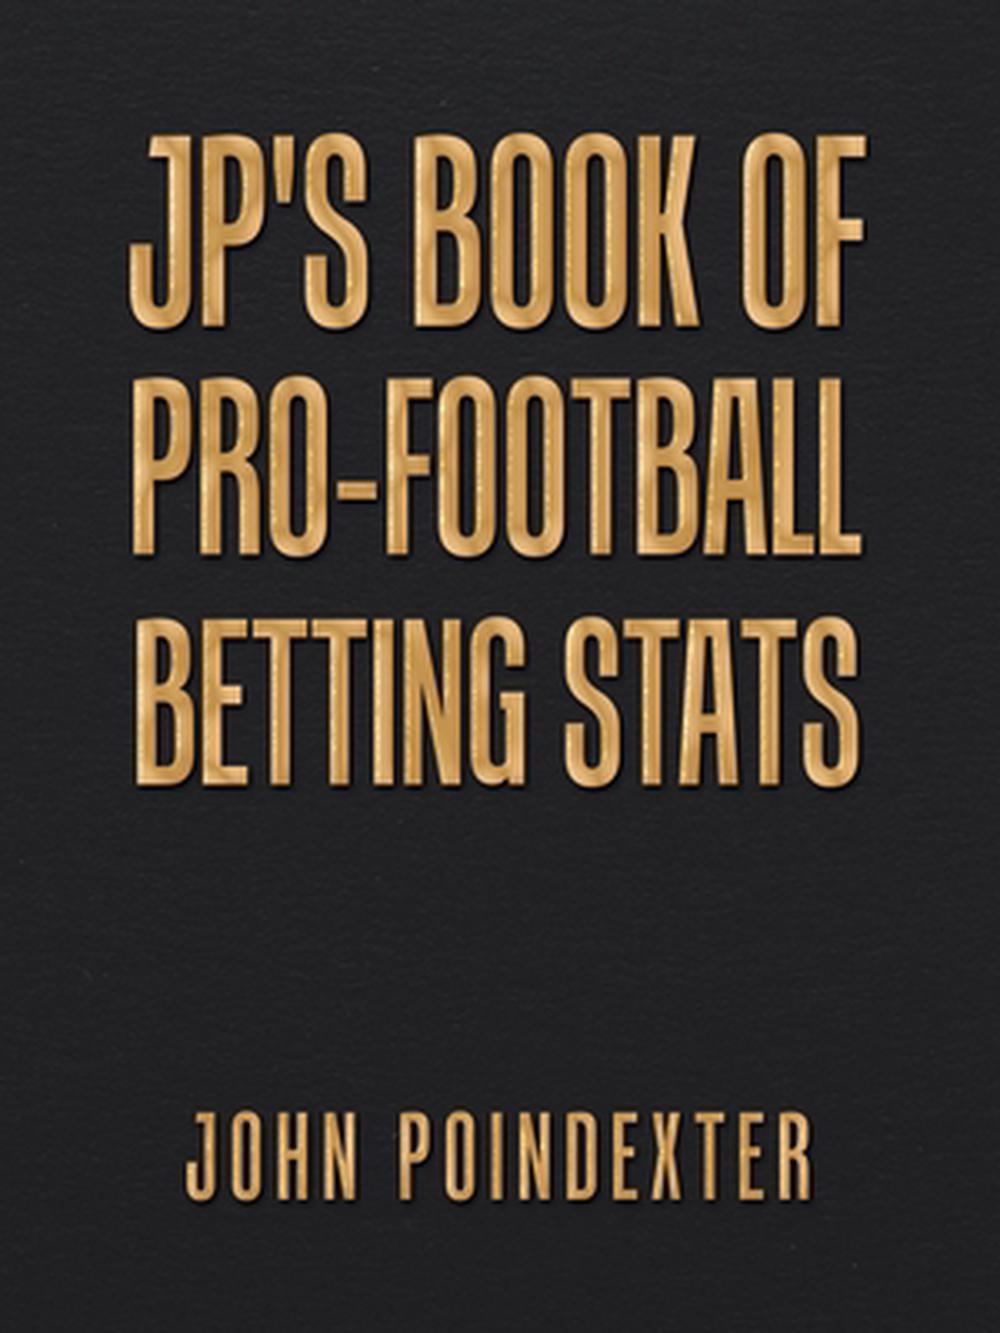 Jp's Book of Pro-football Betting Stats by John Poindexter (English) Paperback B 9781728351780 ...